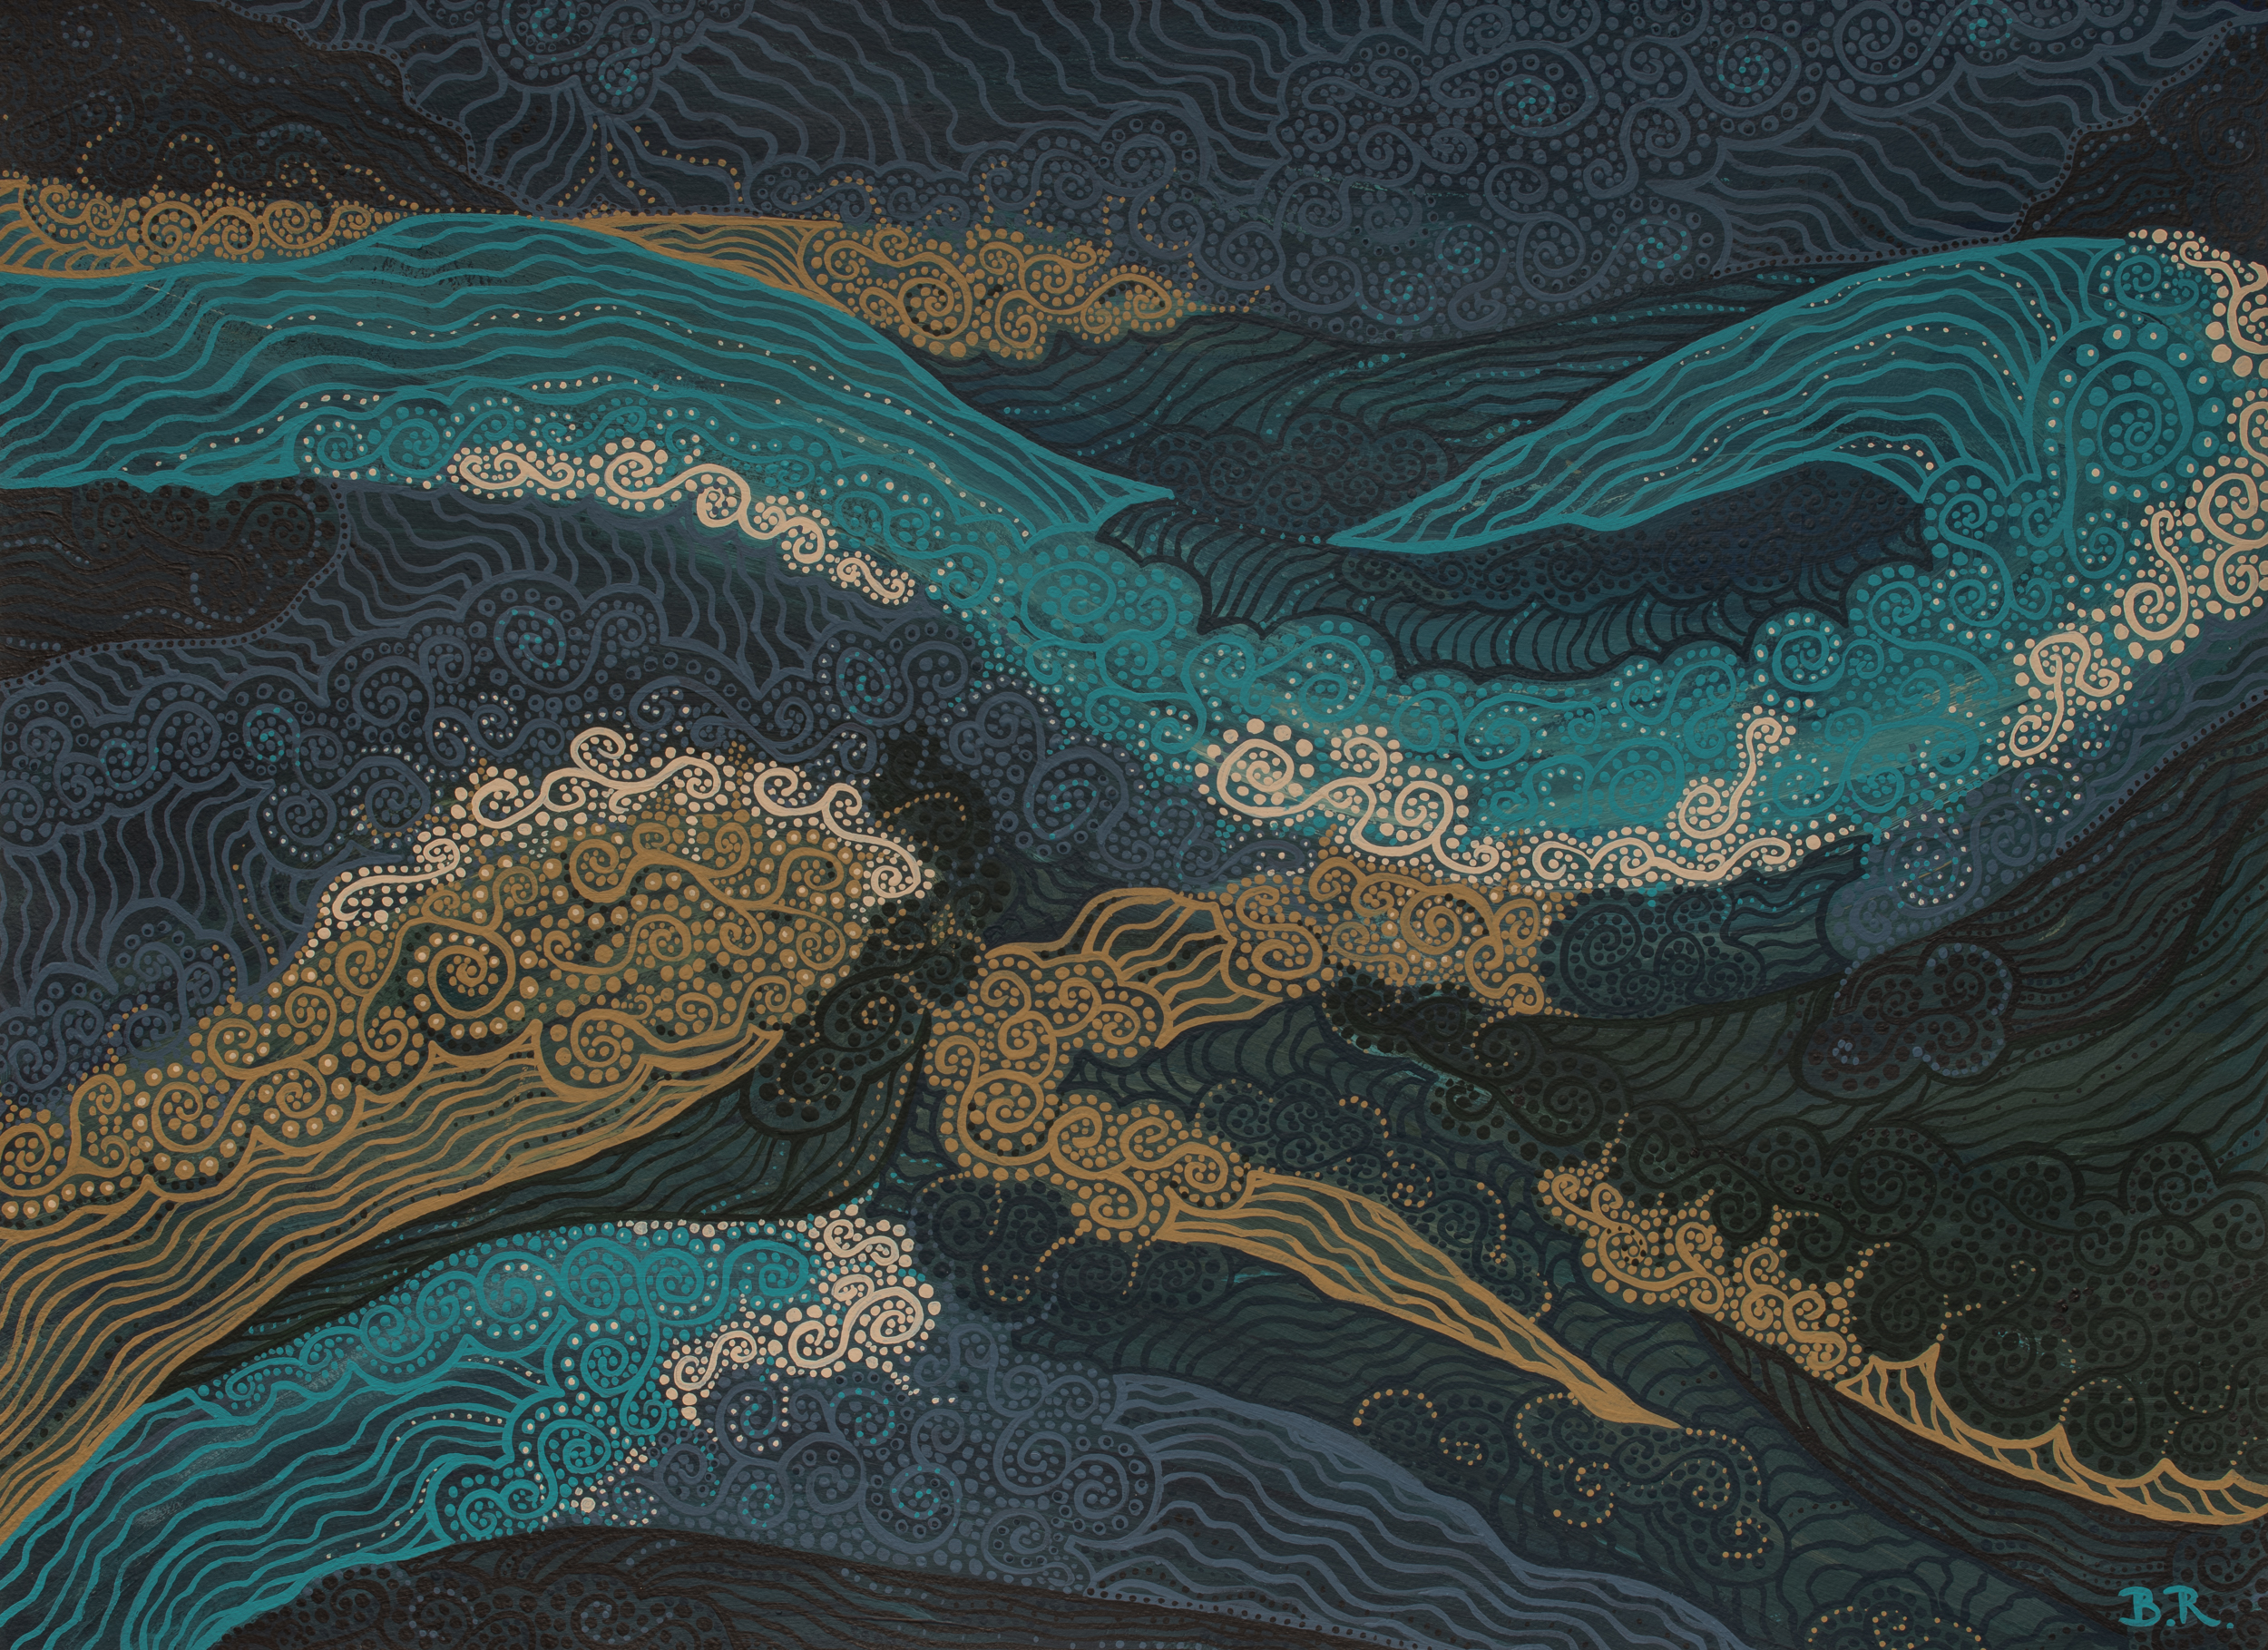 A heavily detailed drawing on a dark background of rolling and swirling wave-like shapes in rich blue, aqua and gold colours.